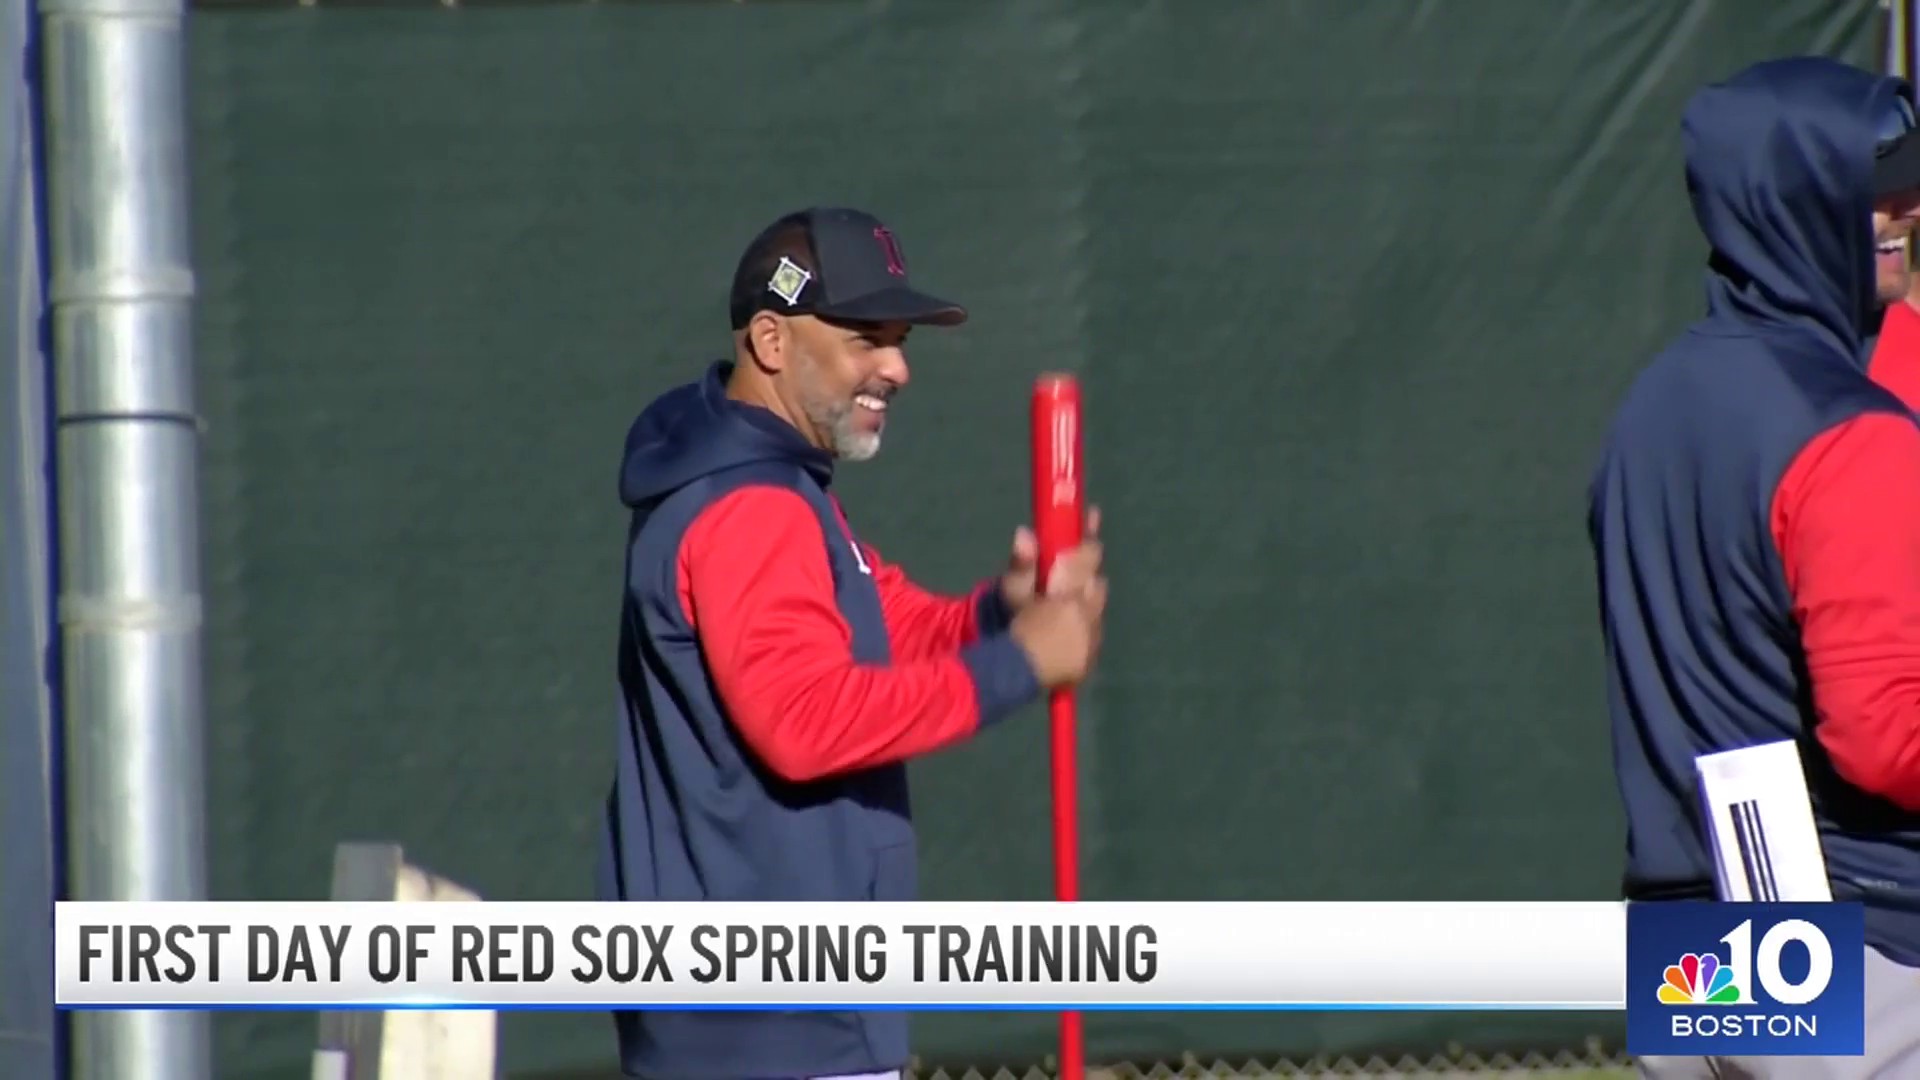 With opening day only a few weeks away, what will the Red Sox